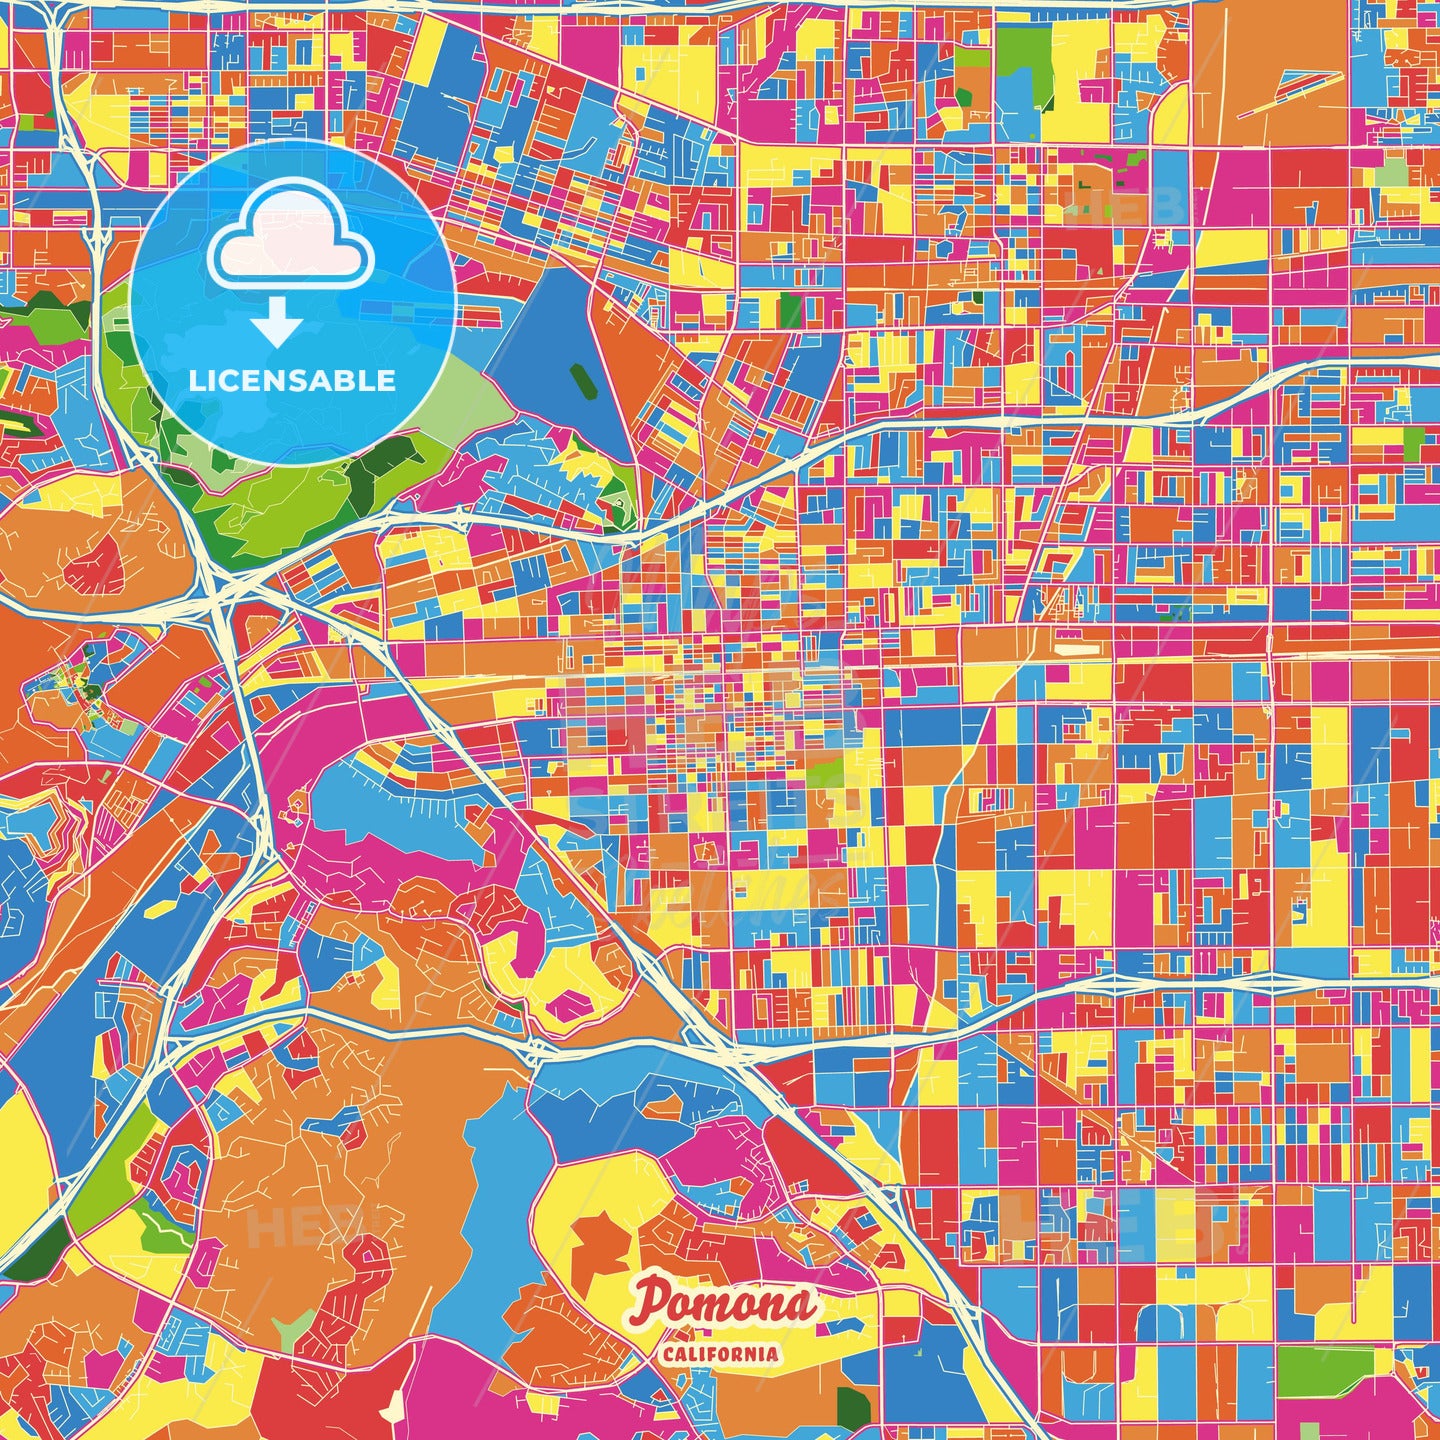 Pomona, United States Crazy Colorful Street Map Poster Template - HEBSTREITS Sketches